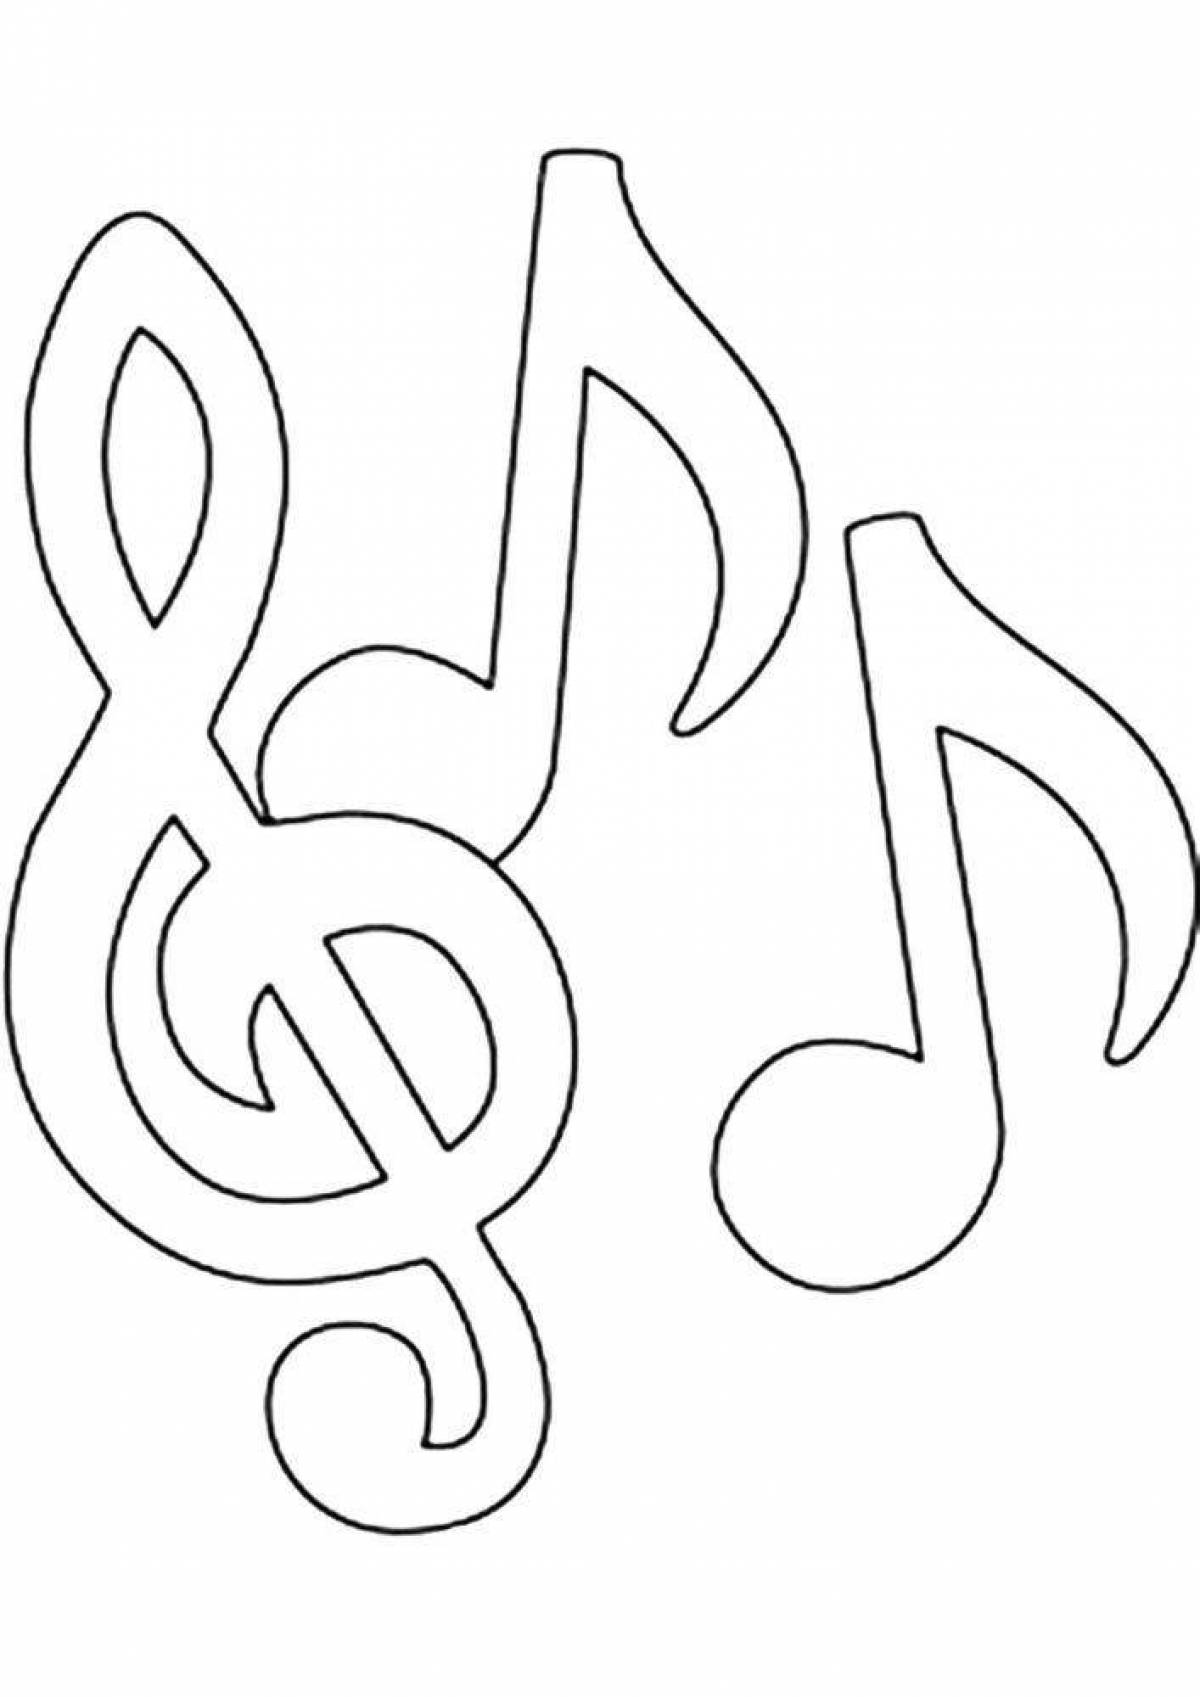 Coloring page holiday music